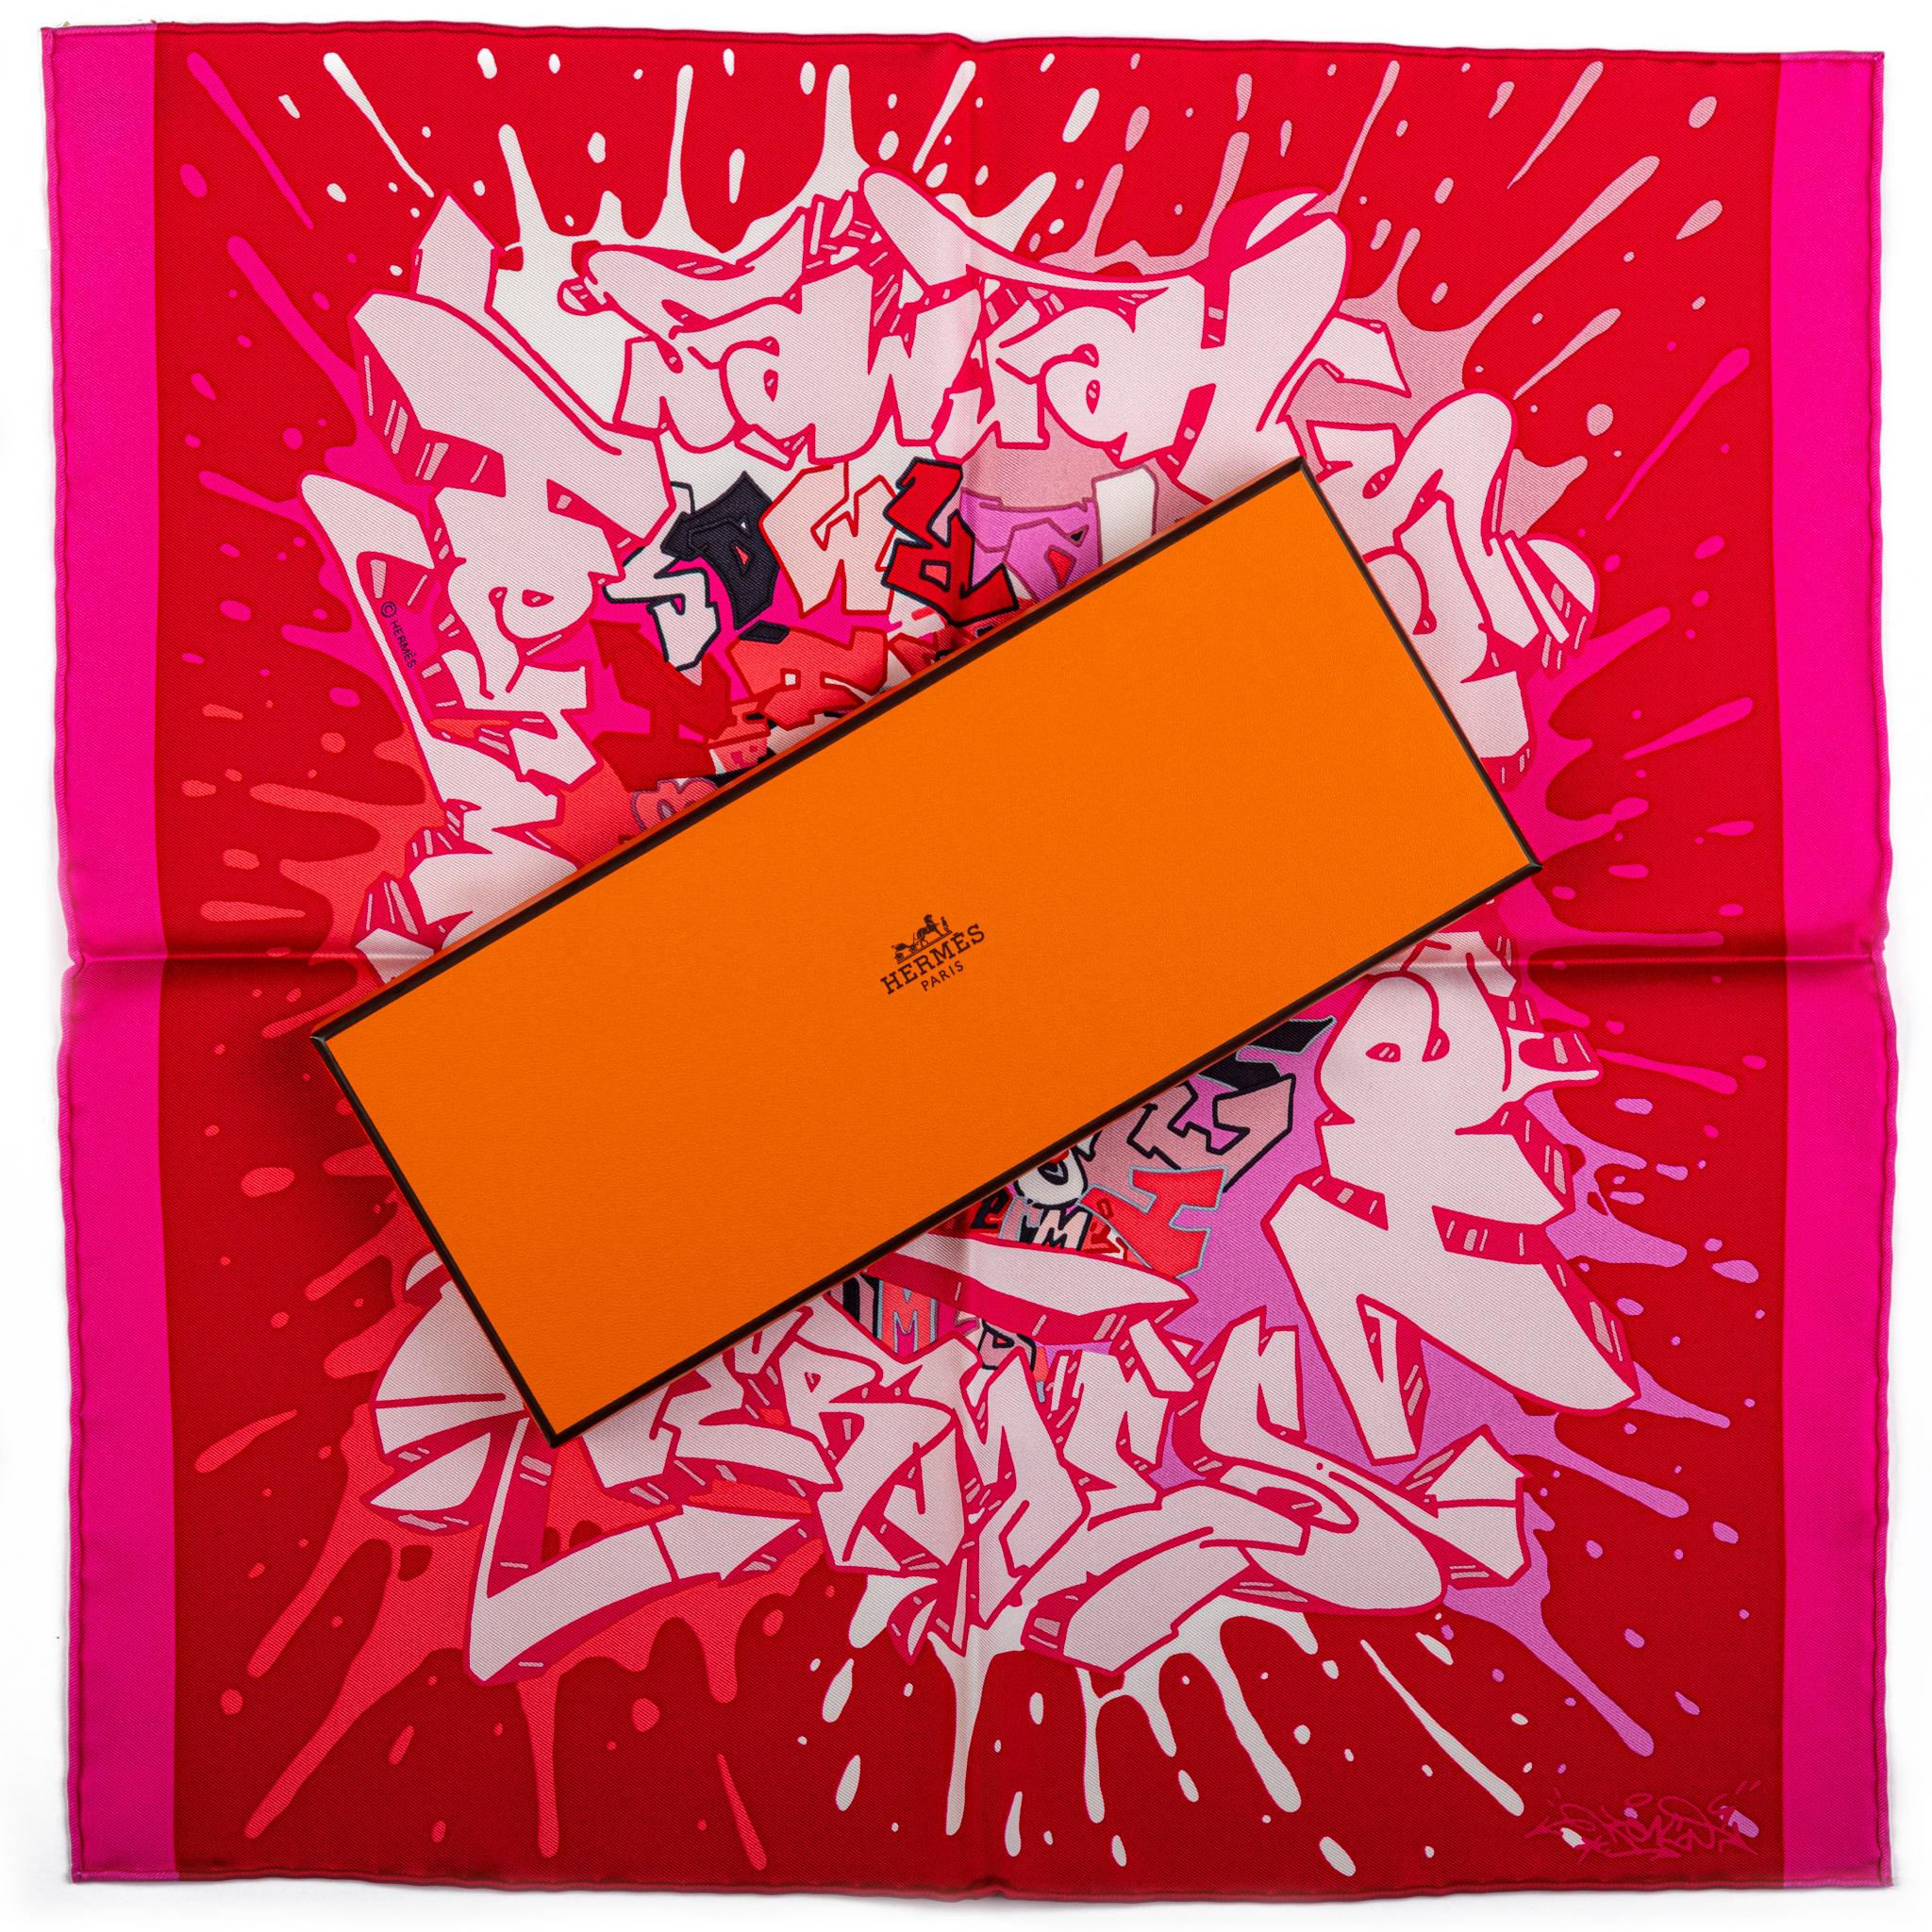 This multi-pink silk scarf was created by graffiti artist and Co-founder of the International Graffiti Festival Kongo. Brand new in box.
